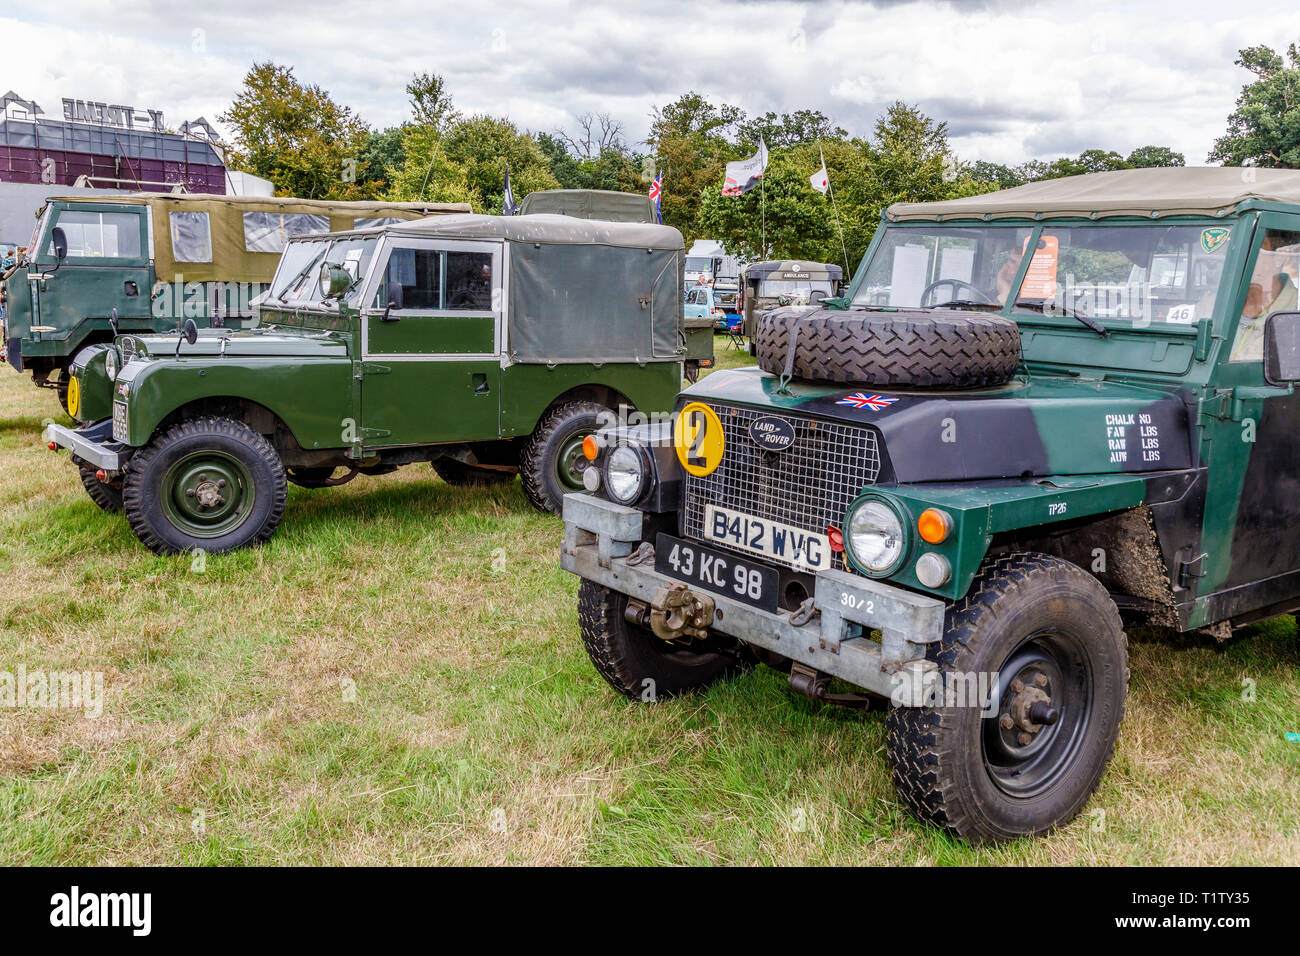 Military vehicle display at the 2018 Aylsham Agricultural Show, Norfolk, UK. Stock Photo